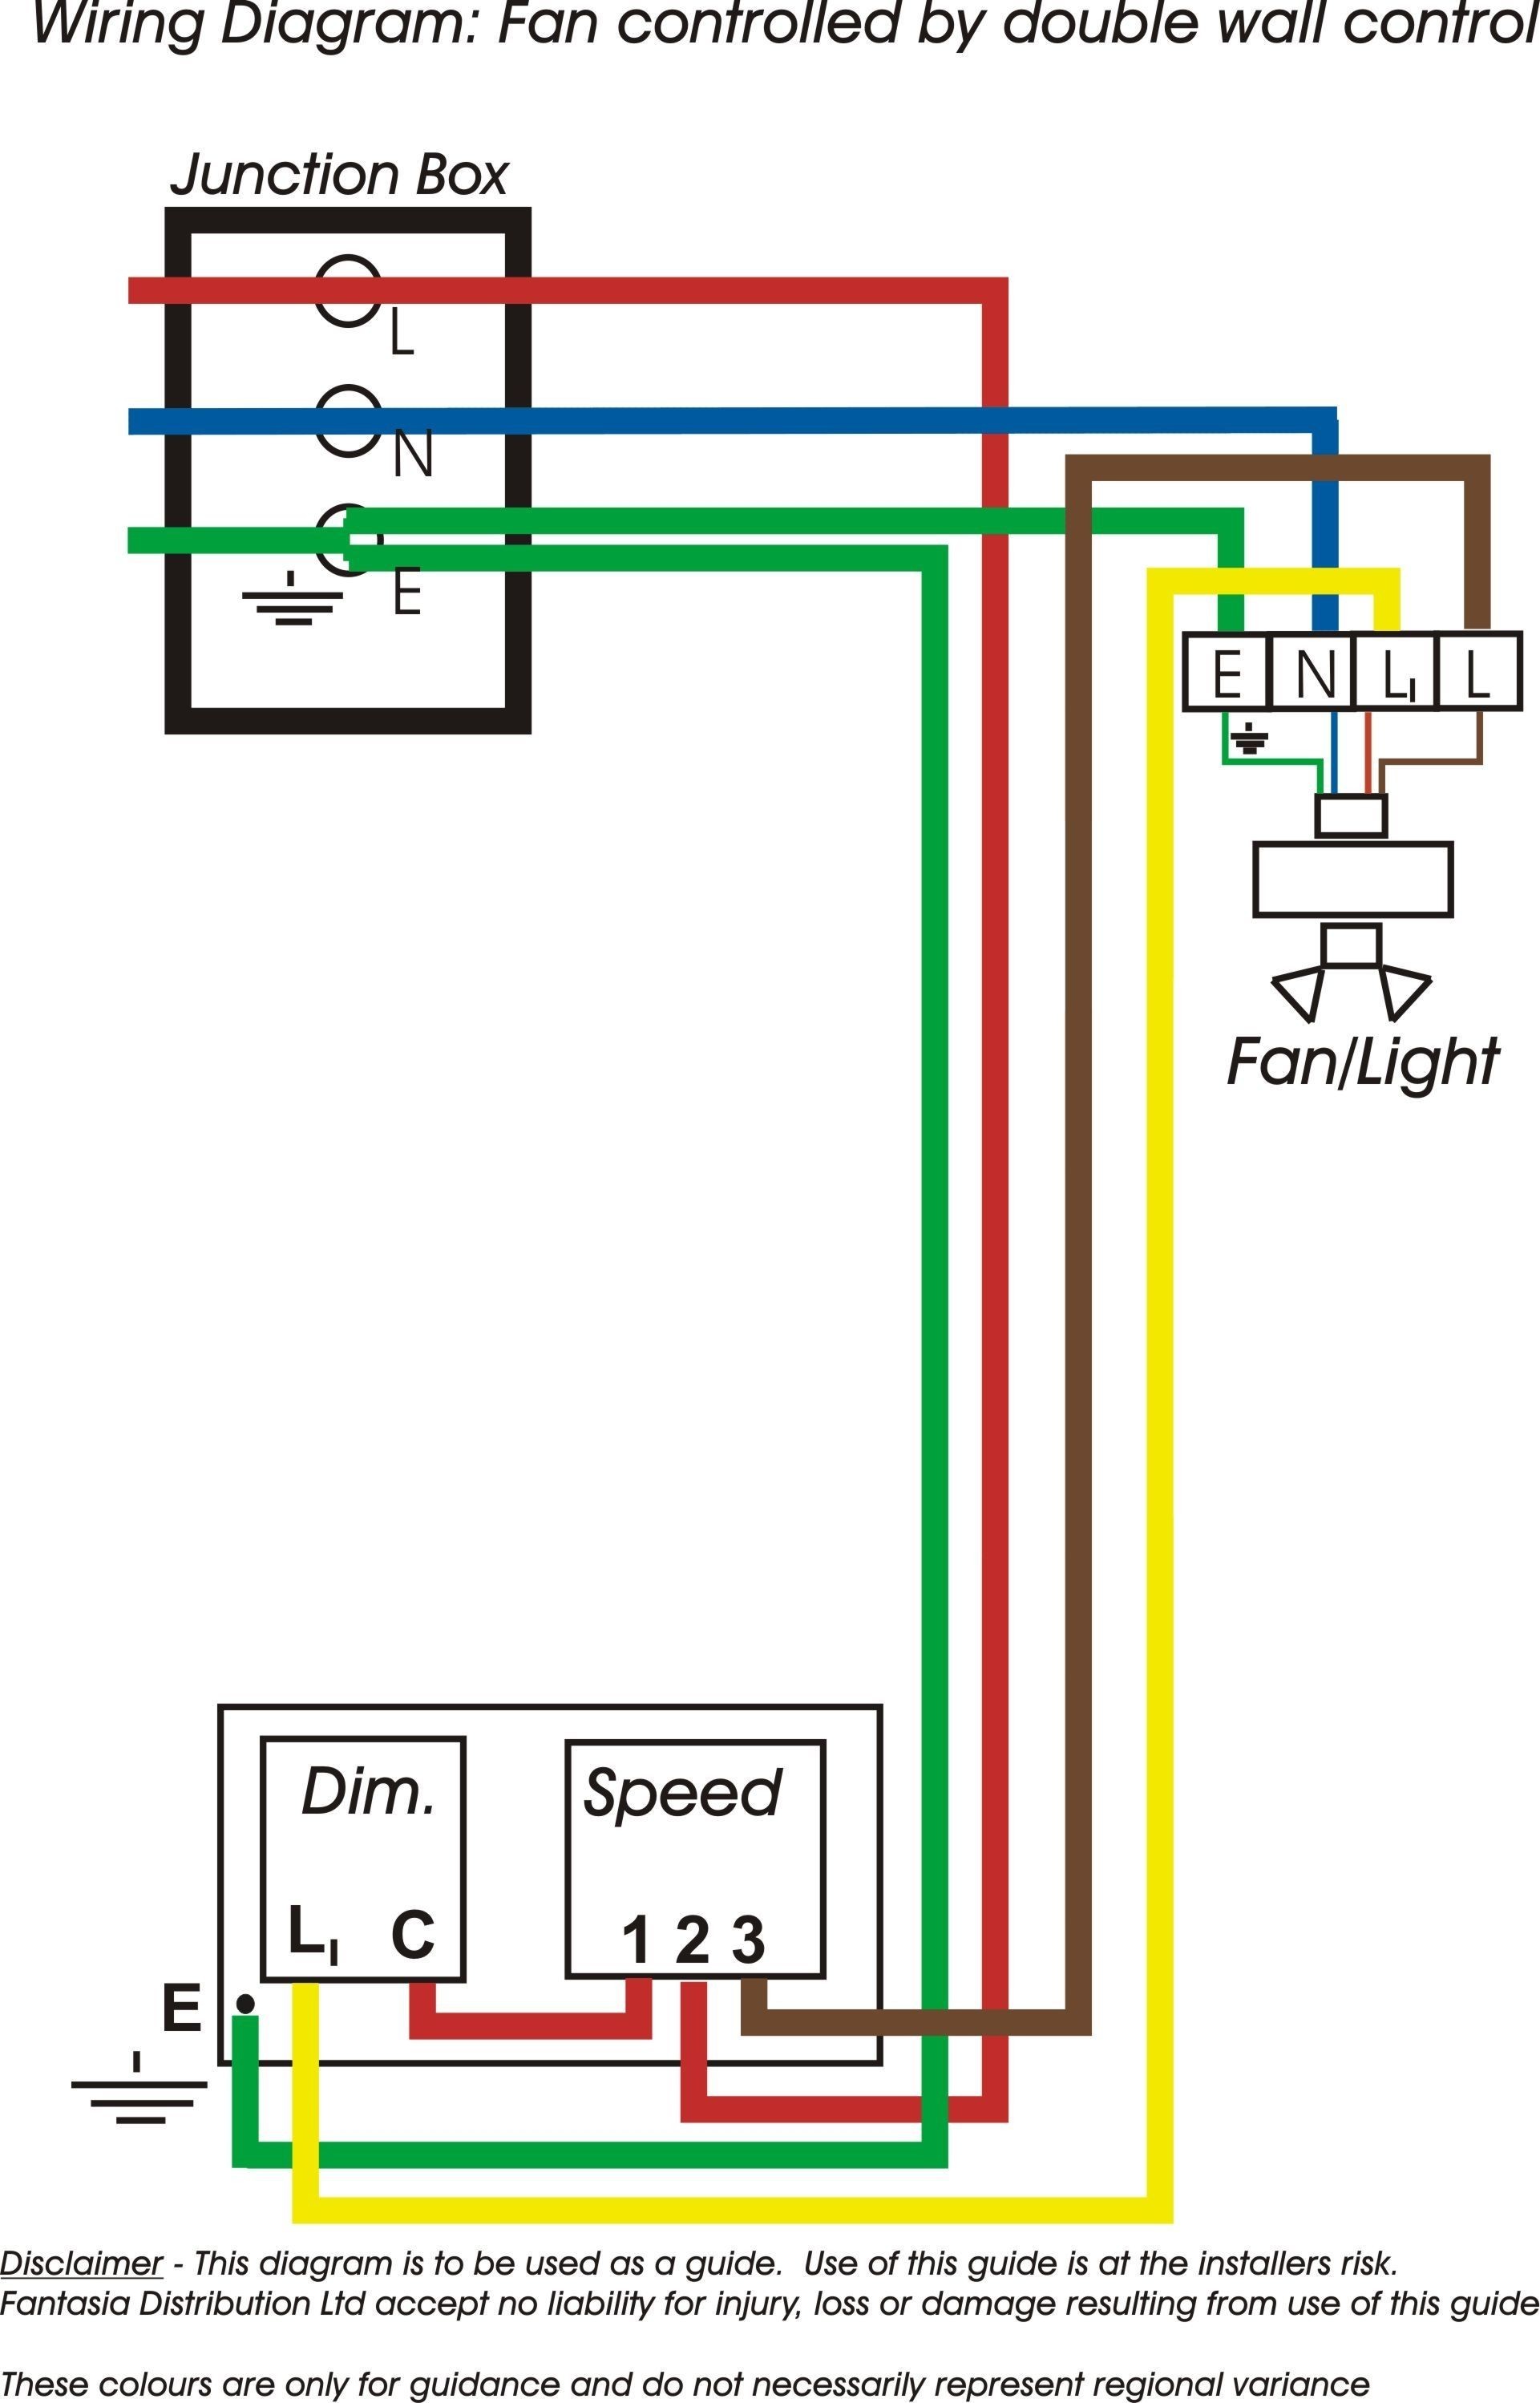 Wiring Diagram For A Hunter Ceiling Fan Remote New Hunter Fan Remote Control Wiring